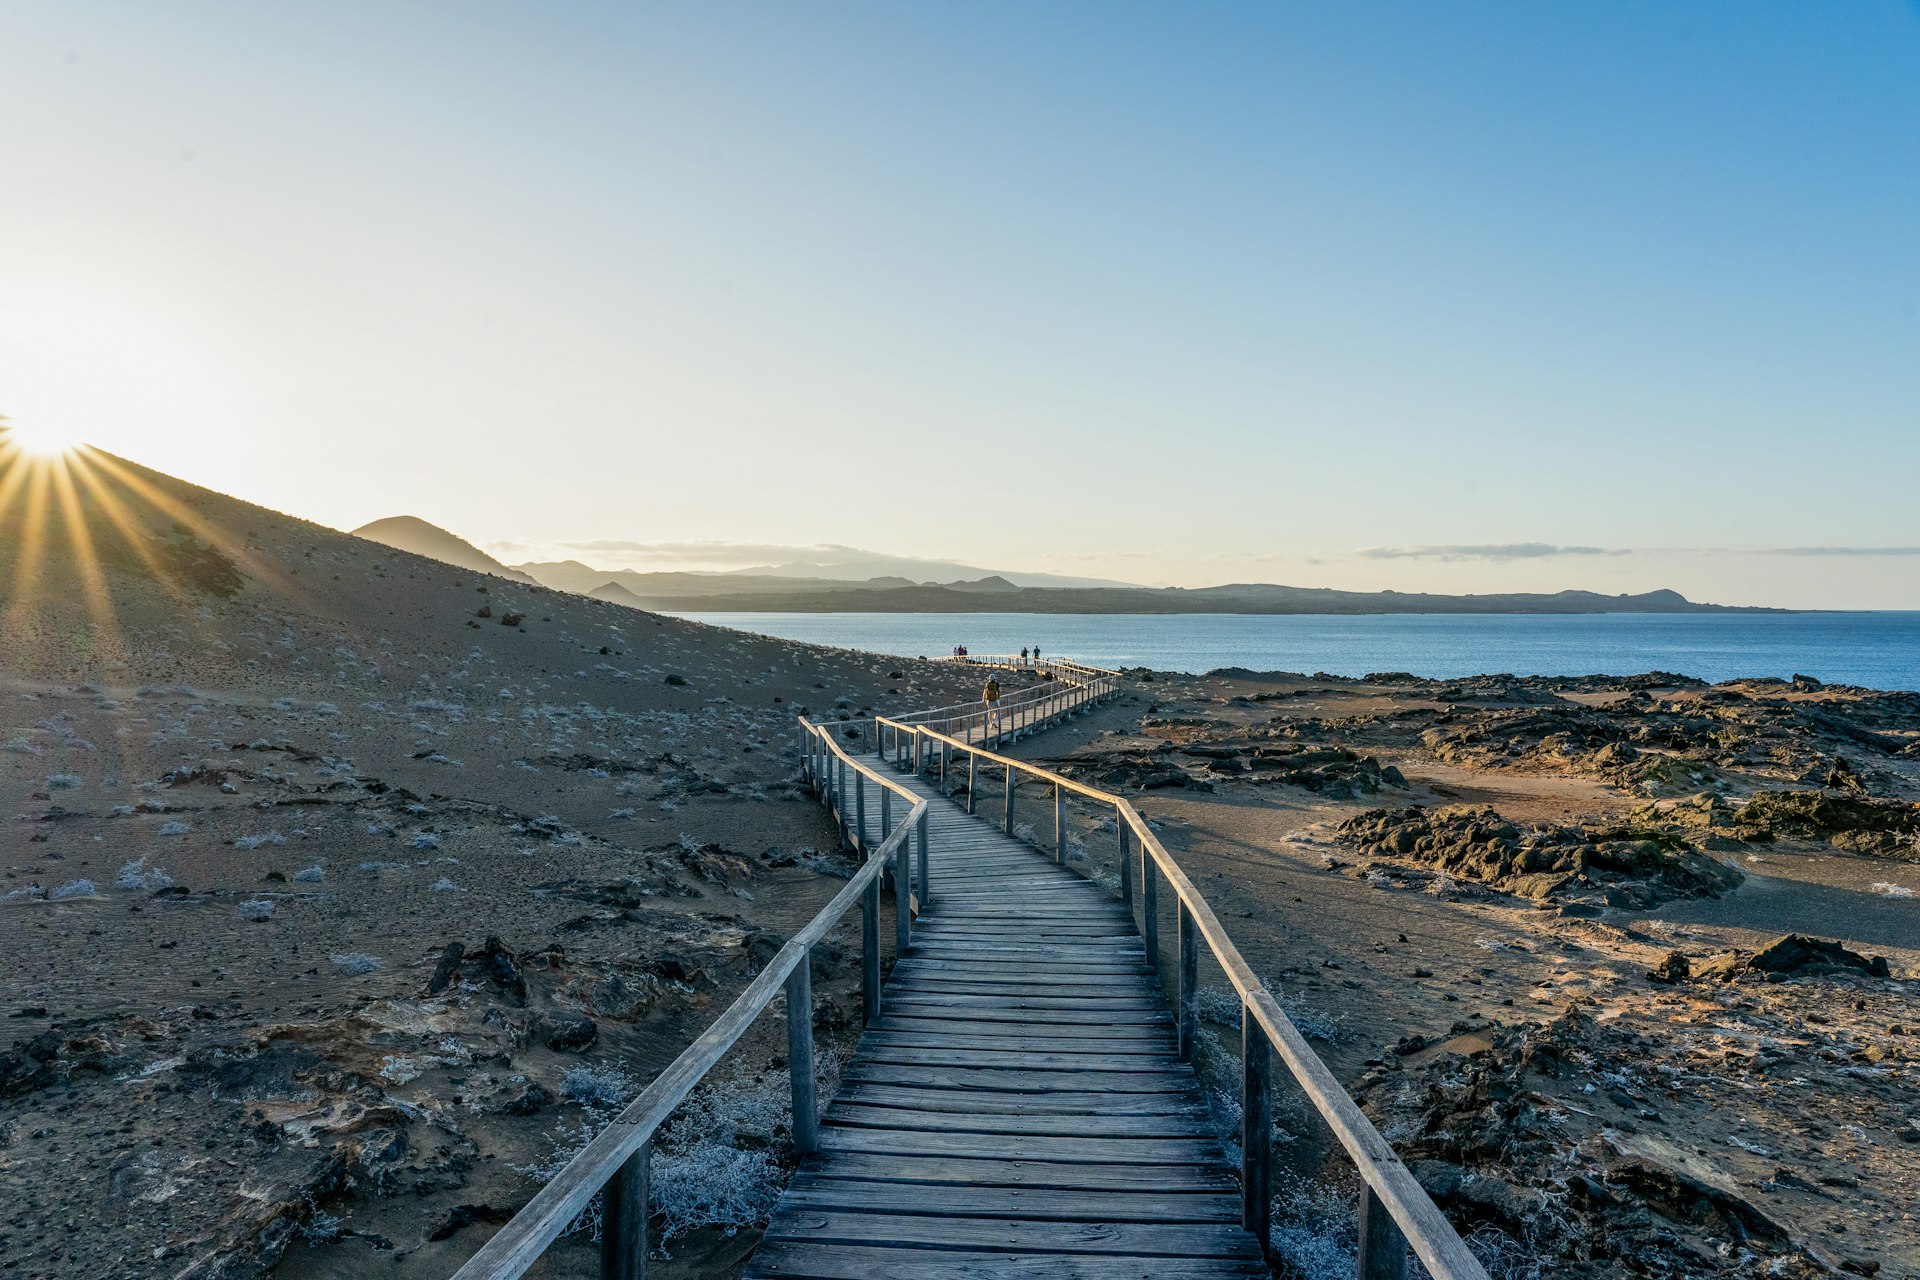 A wooden trail leading to the beach over a rocky island